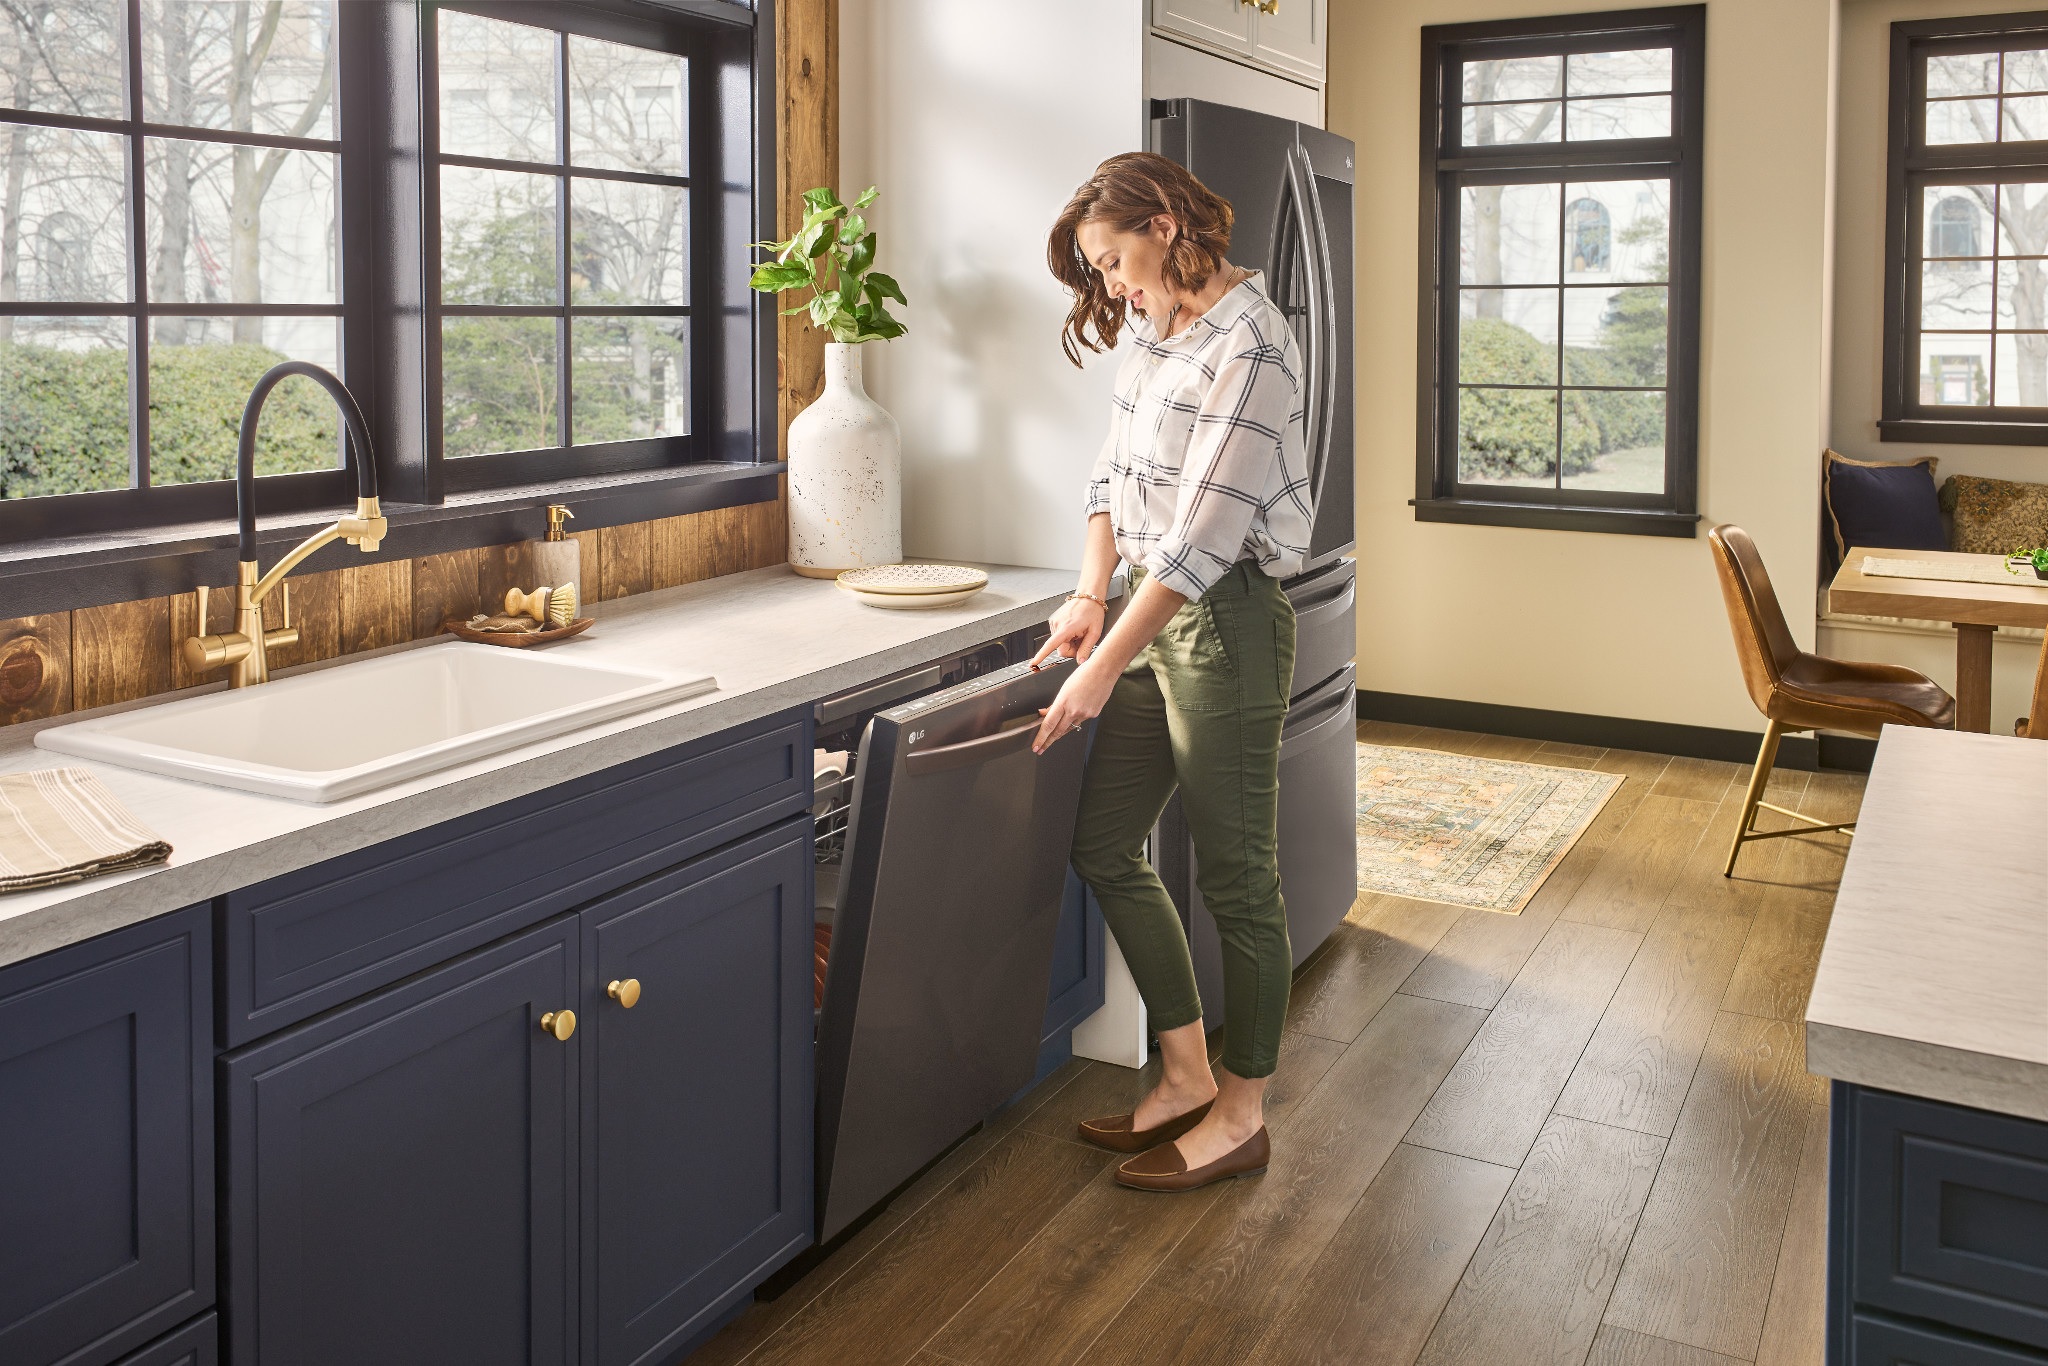 young woman opens LG stainless steel dishwasher to unload clean dishes